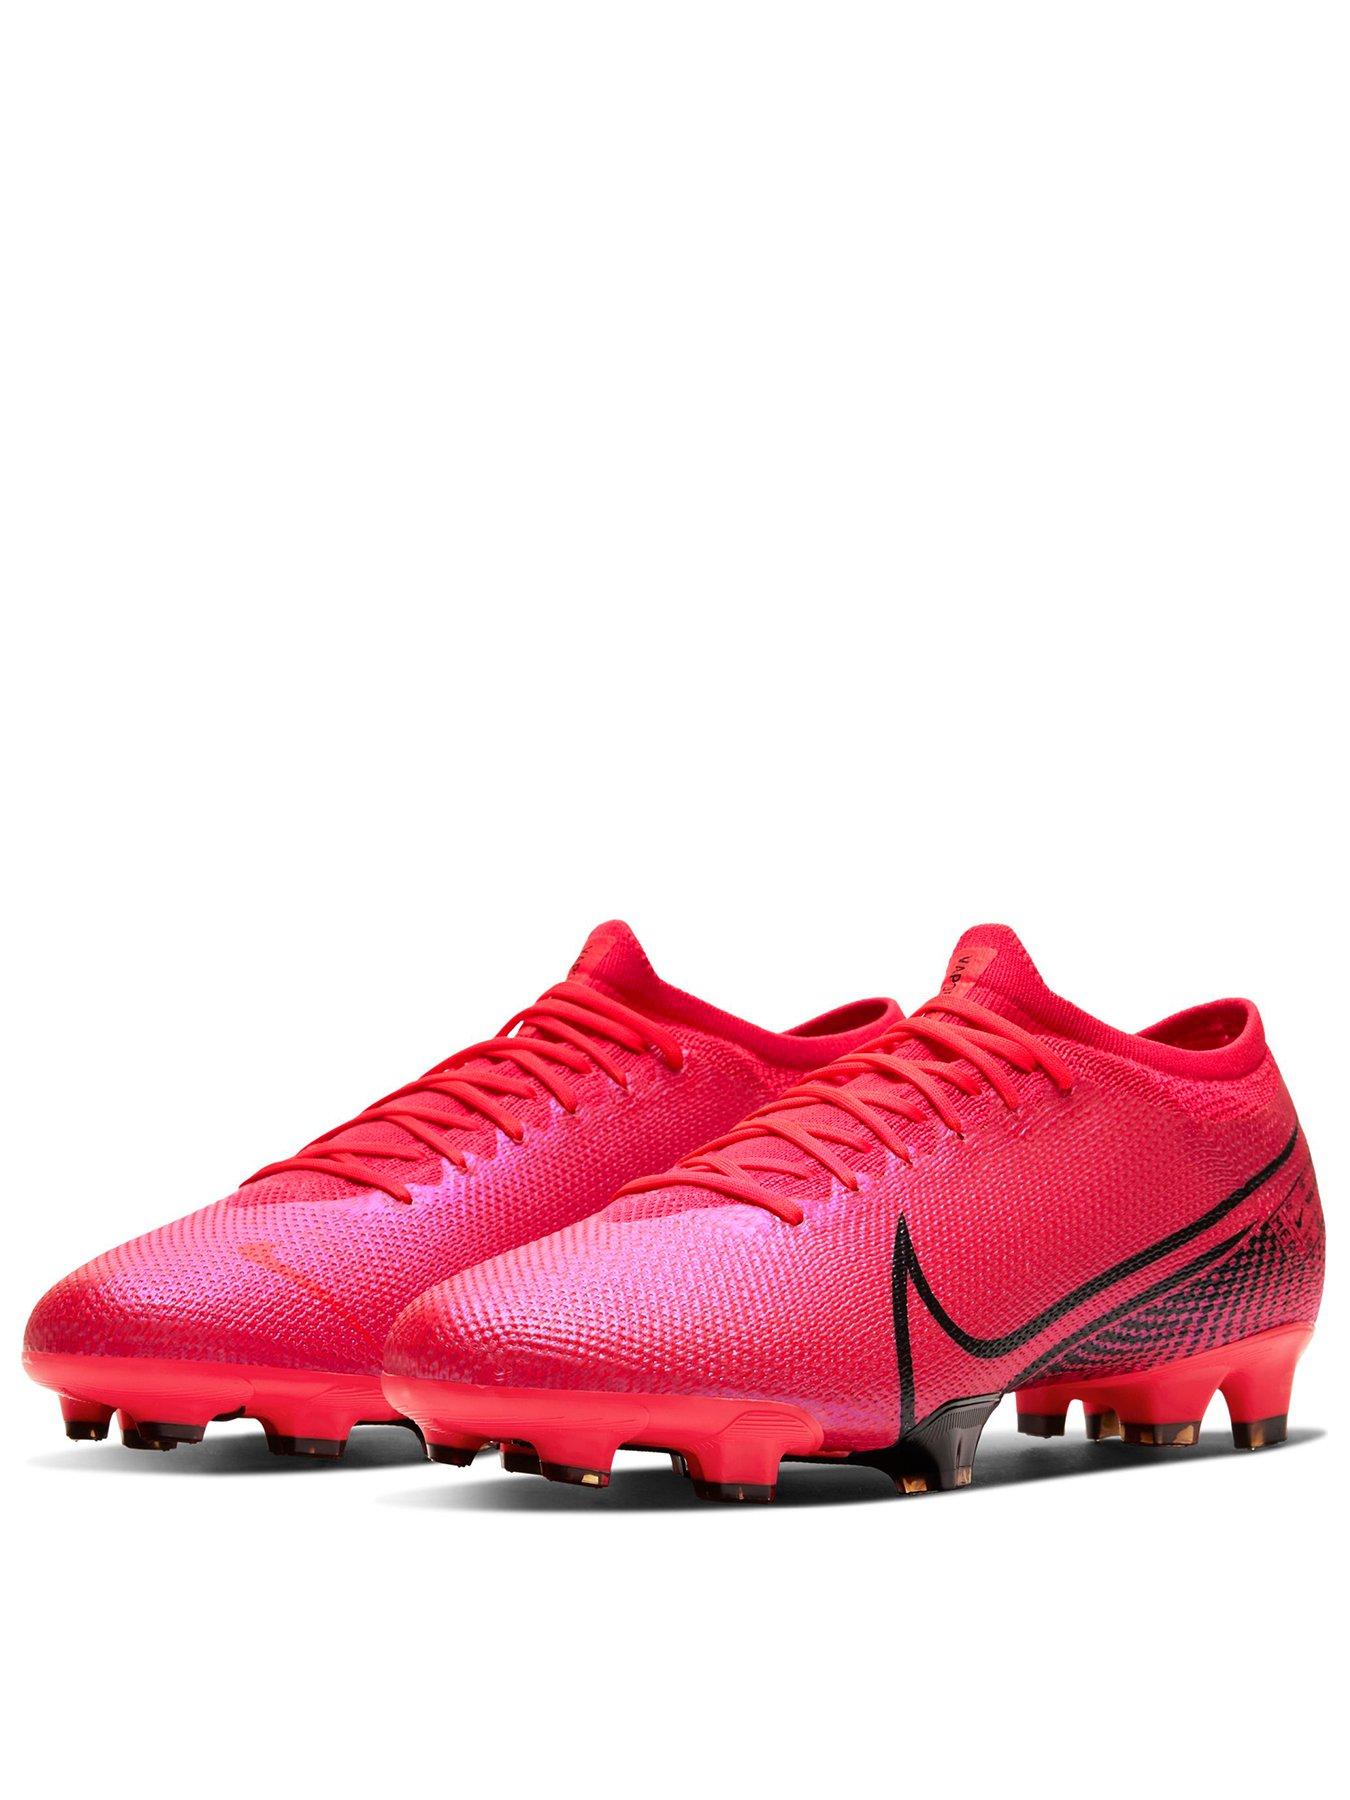 football nike boots red 